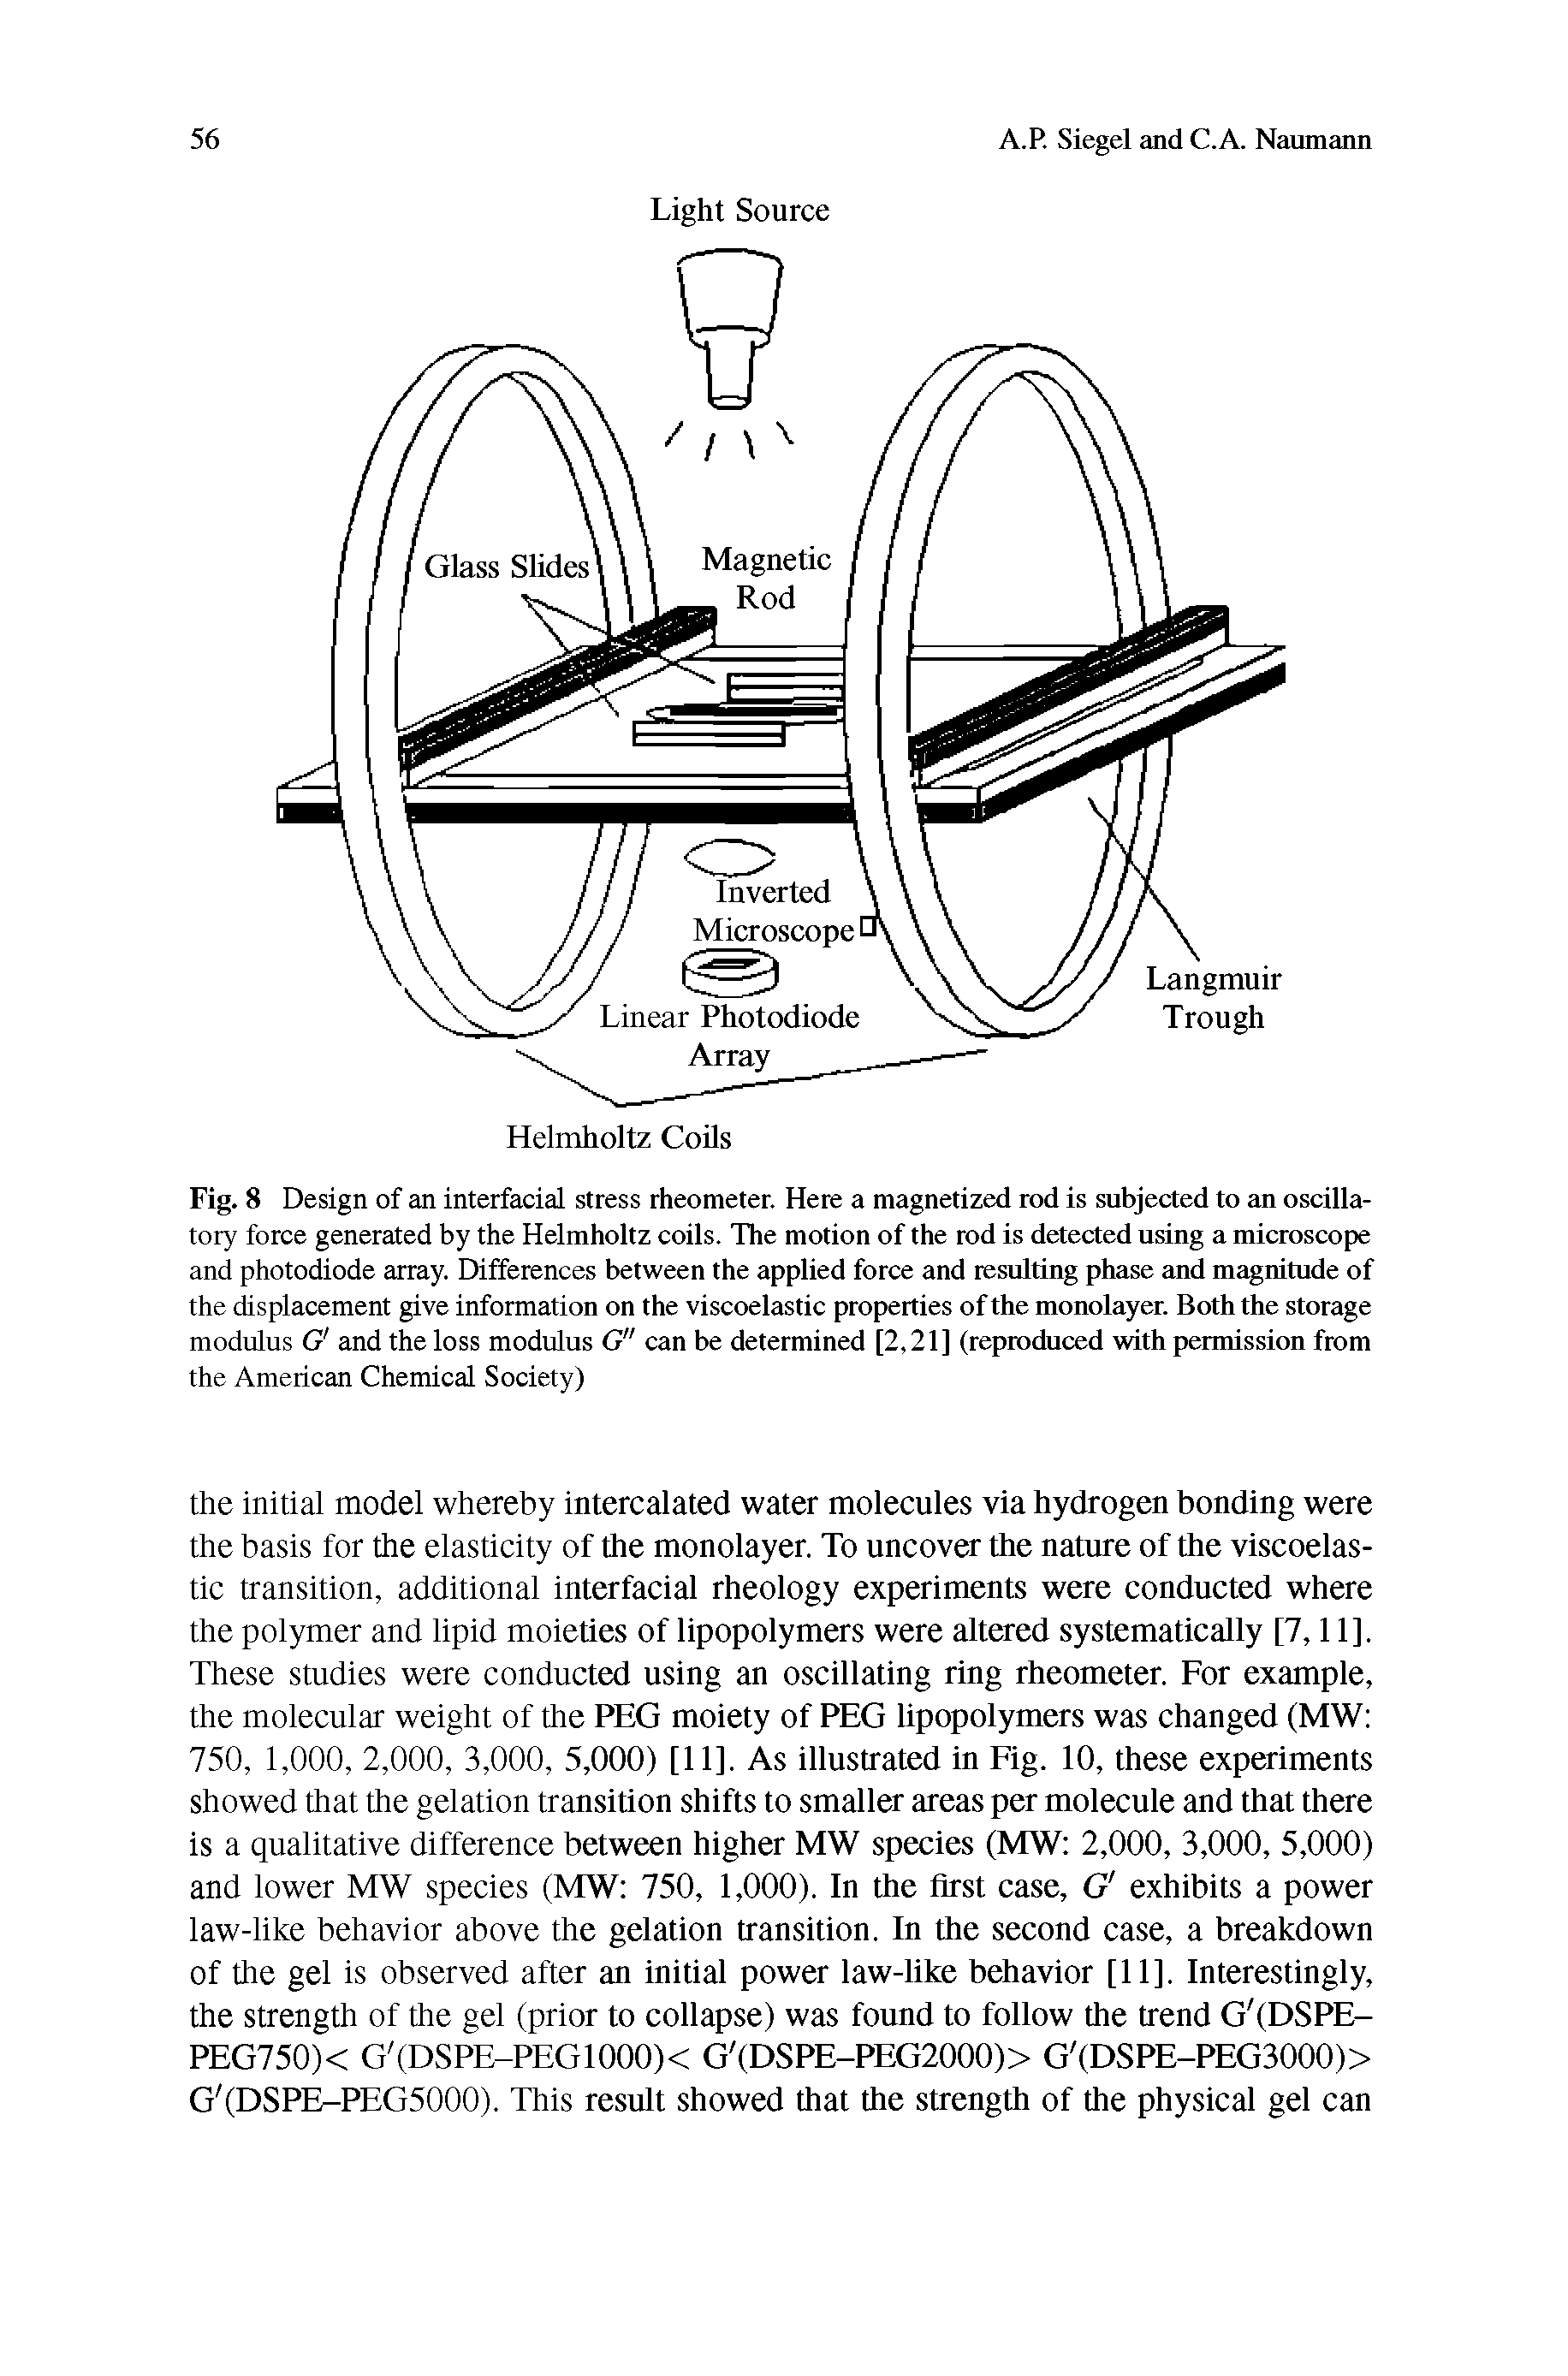 Fig. 8 Design of an interfacial stress rheometer. Here a magnetized rod is subjected to an oscillatory force generated by the Helmholtz coils. The motion of the rod is detected using a microscope and photodiode array. Differences between the applied force and resulting phase and magnitude of the displacement give information on the viscoelastic properties of the monolayer. Both the storage modulus G and the loss modulus G" can be determined [2,21] (reproduced with permission from the American Chemical Society)...